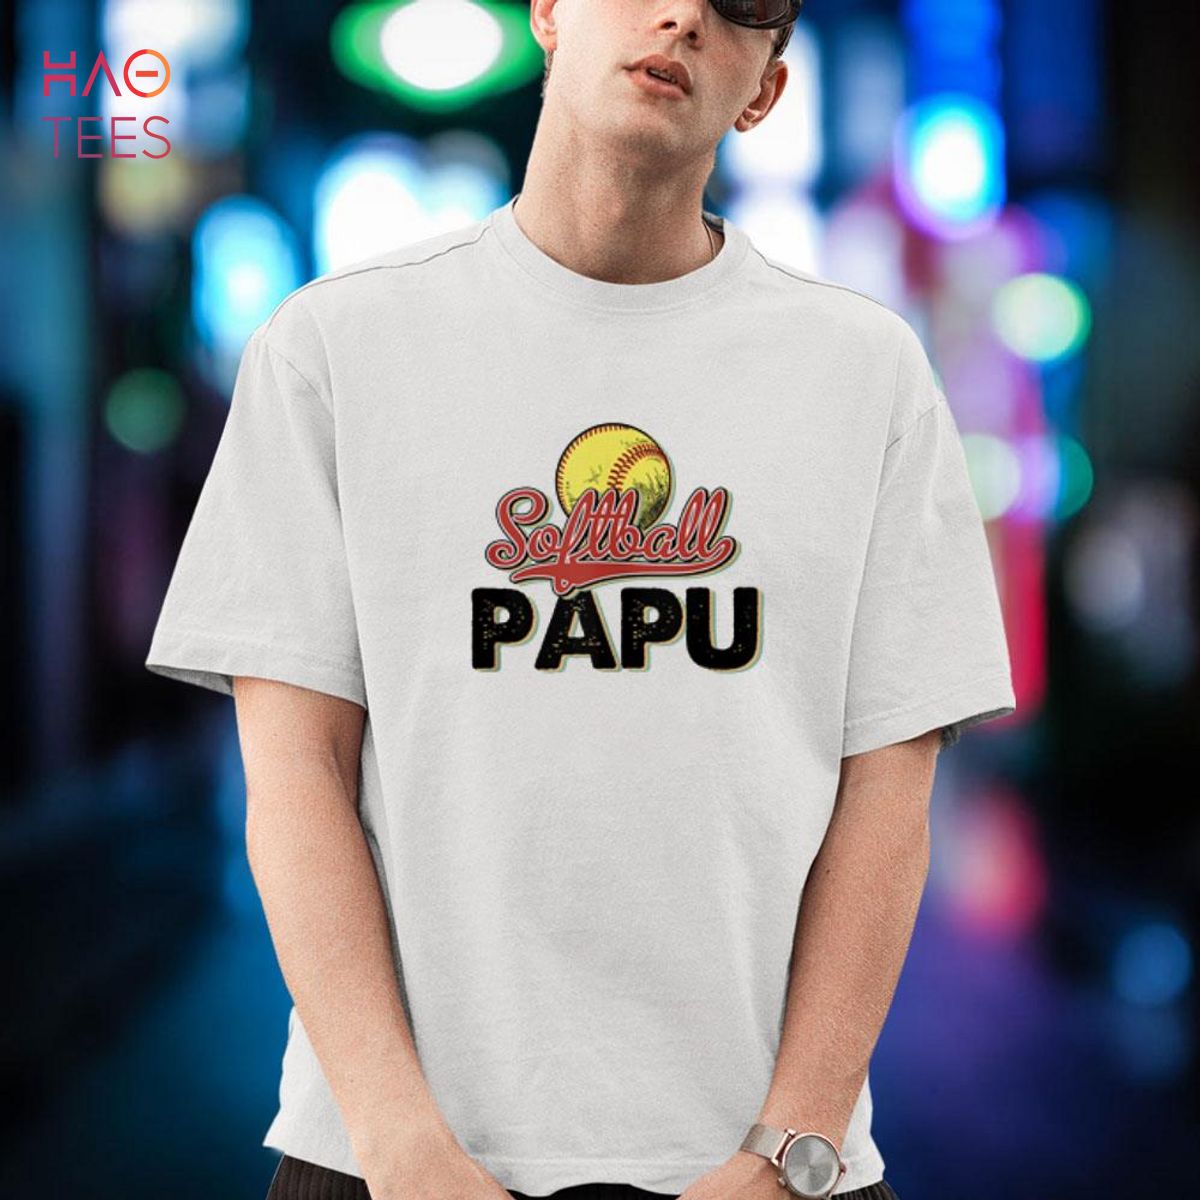 Softball Papu Retro Vintage Father’s Day Game Day Shirt